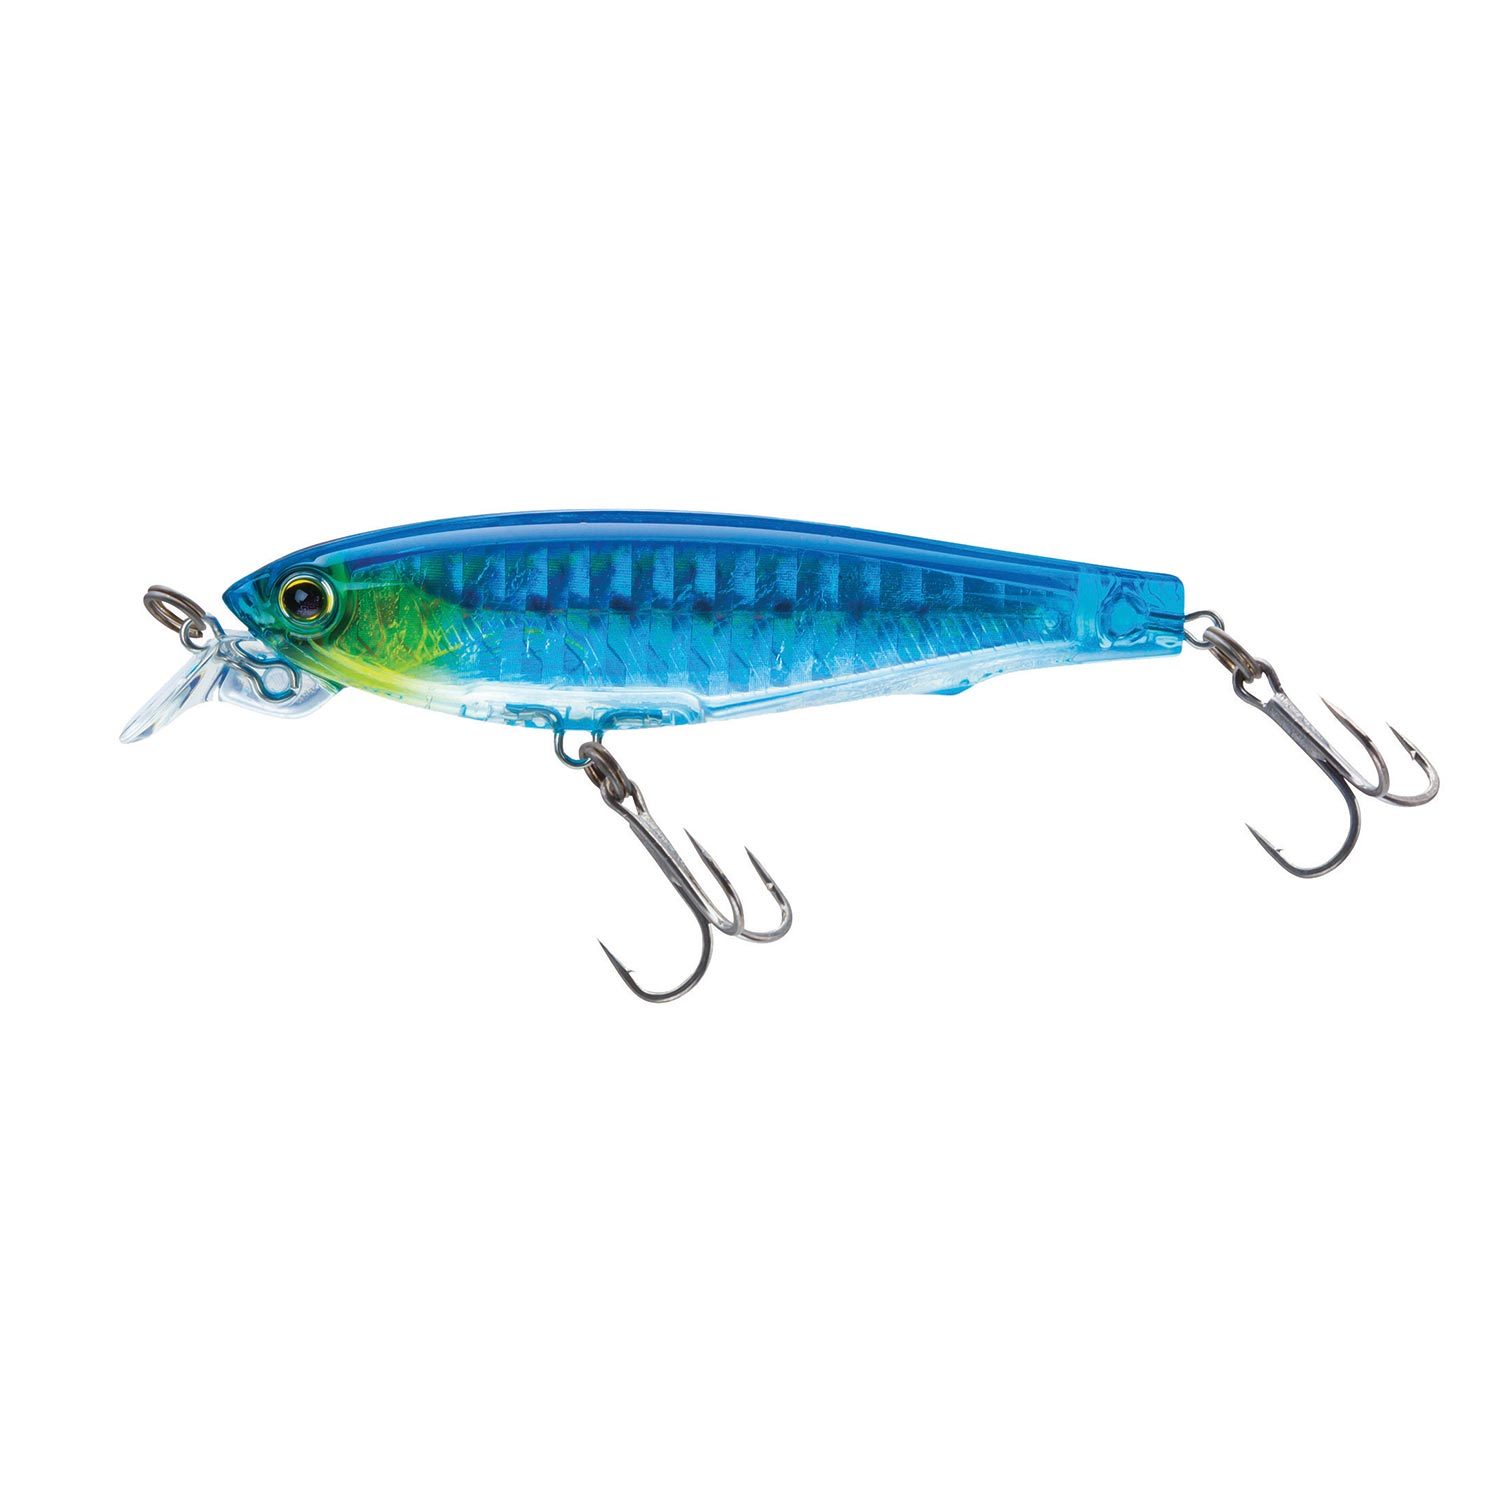 3DS Minnow™ Fishing Lure, 2 3/4"